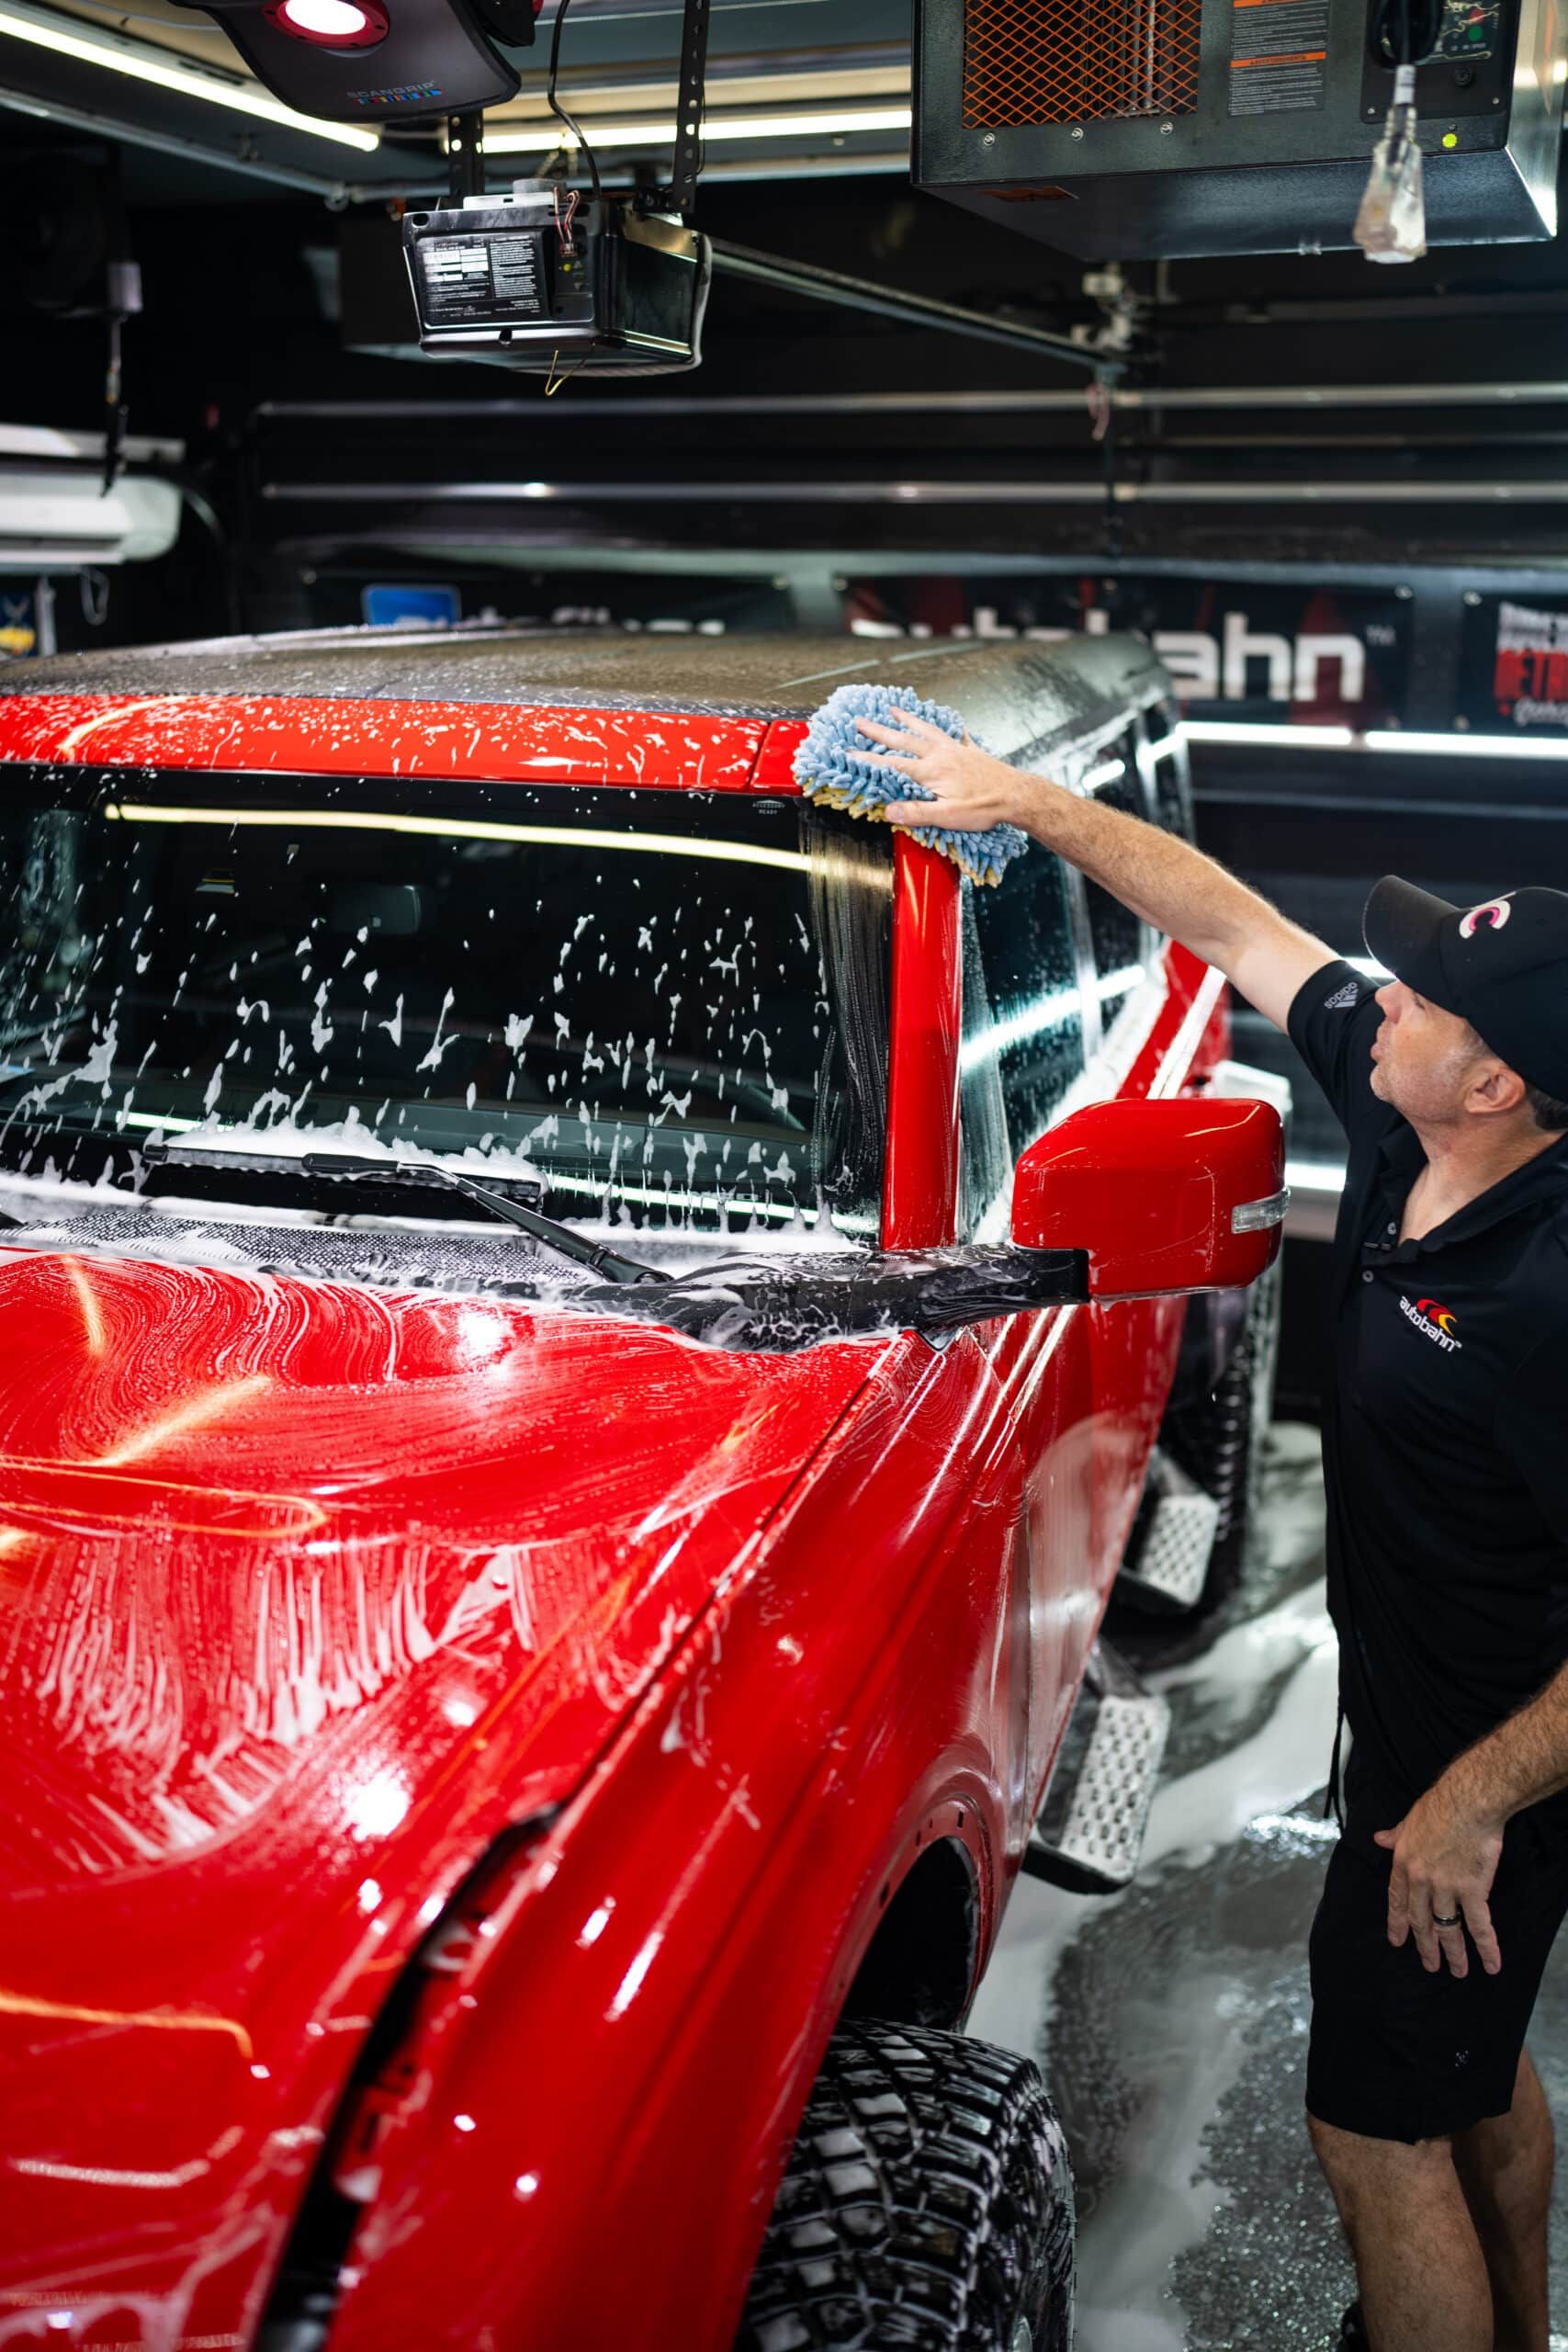 A man is washing a red truck in a garage.